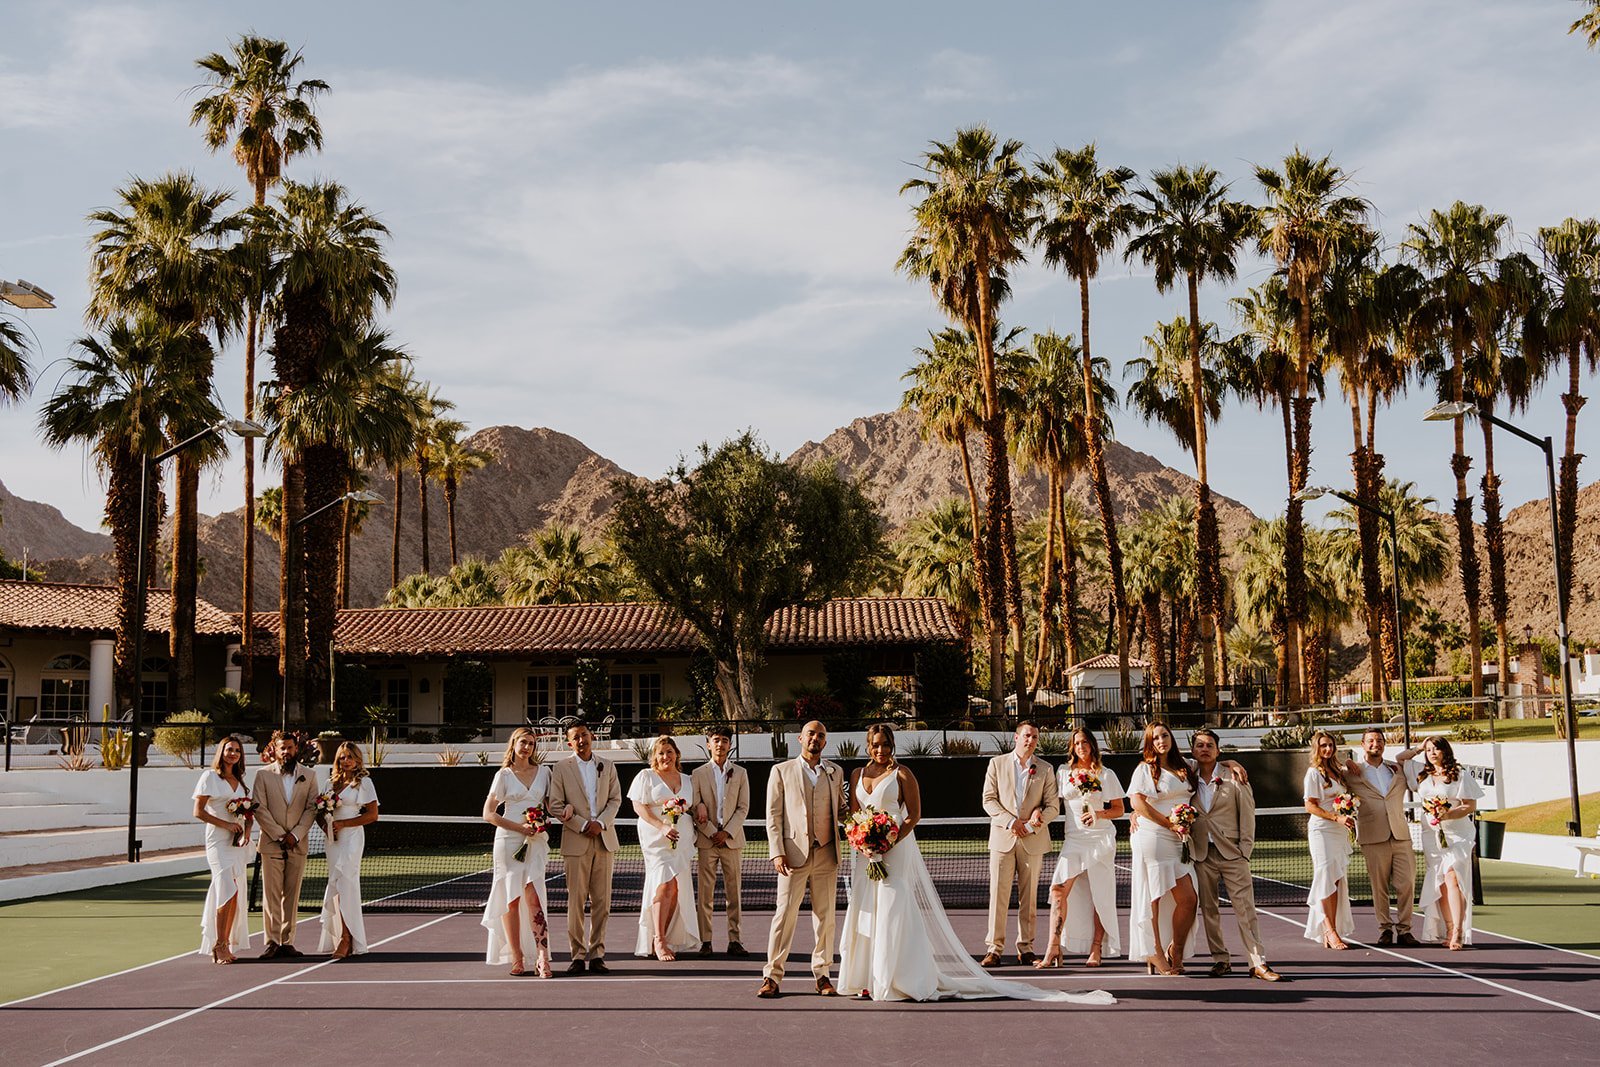 Wedding party photo at the tennis courts at La Quinta Resort in Palm Springs | photo by Tida Svy